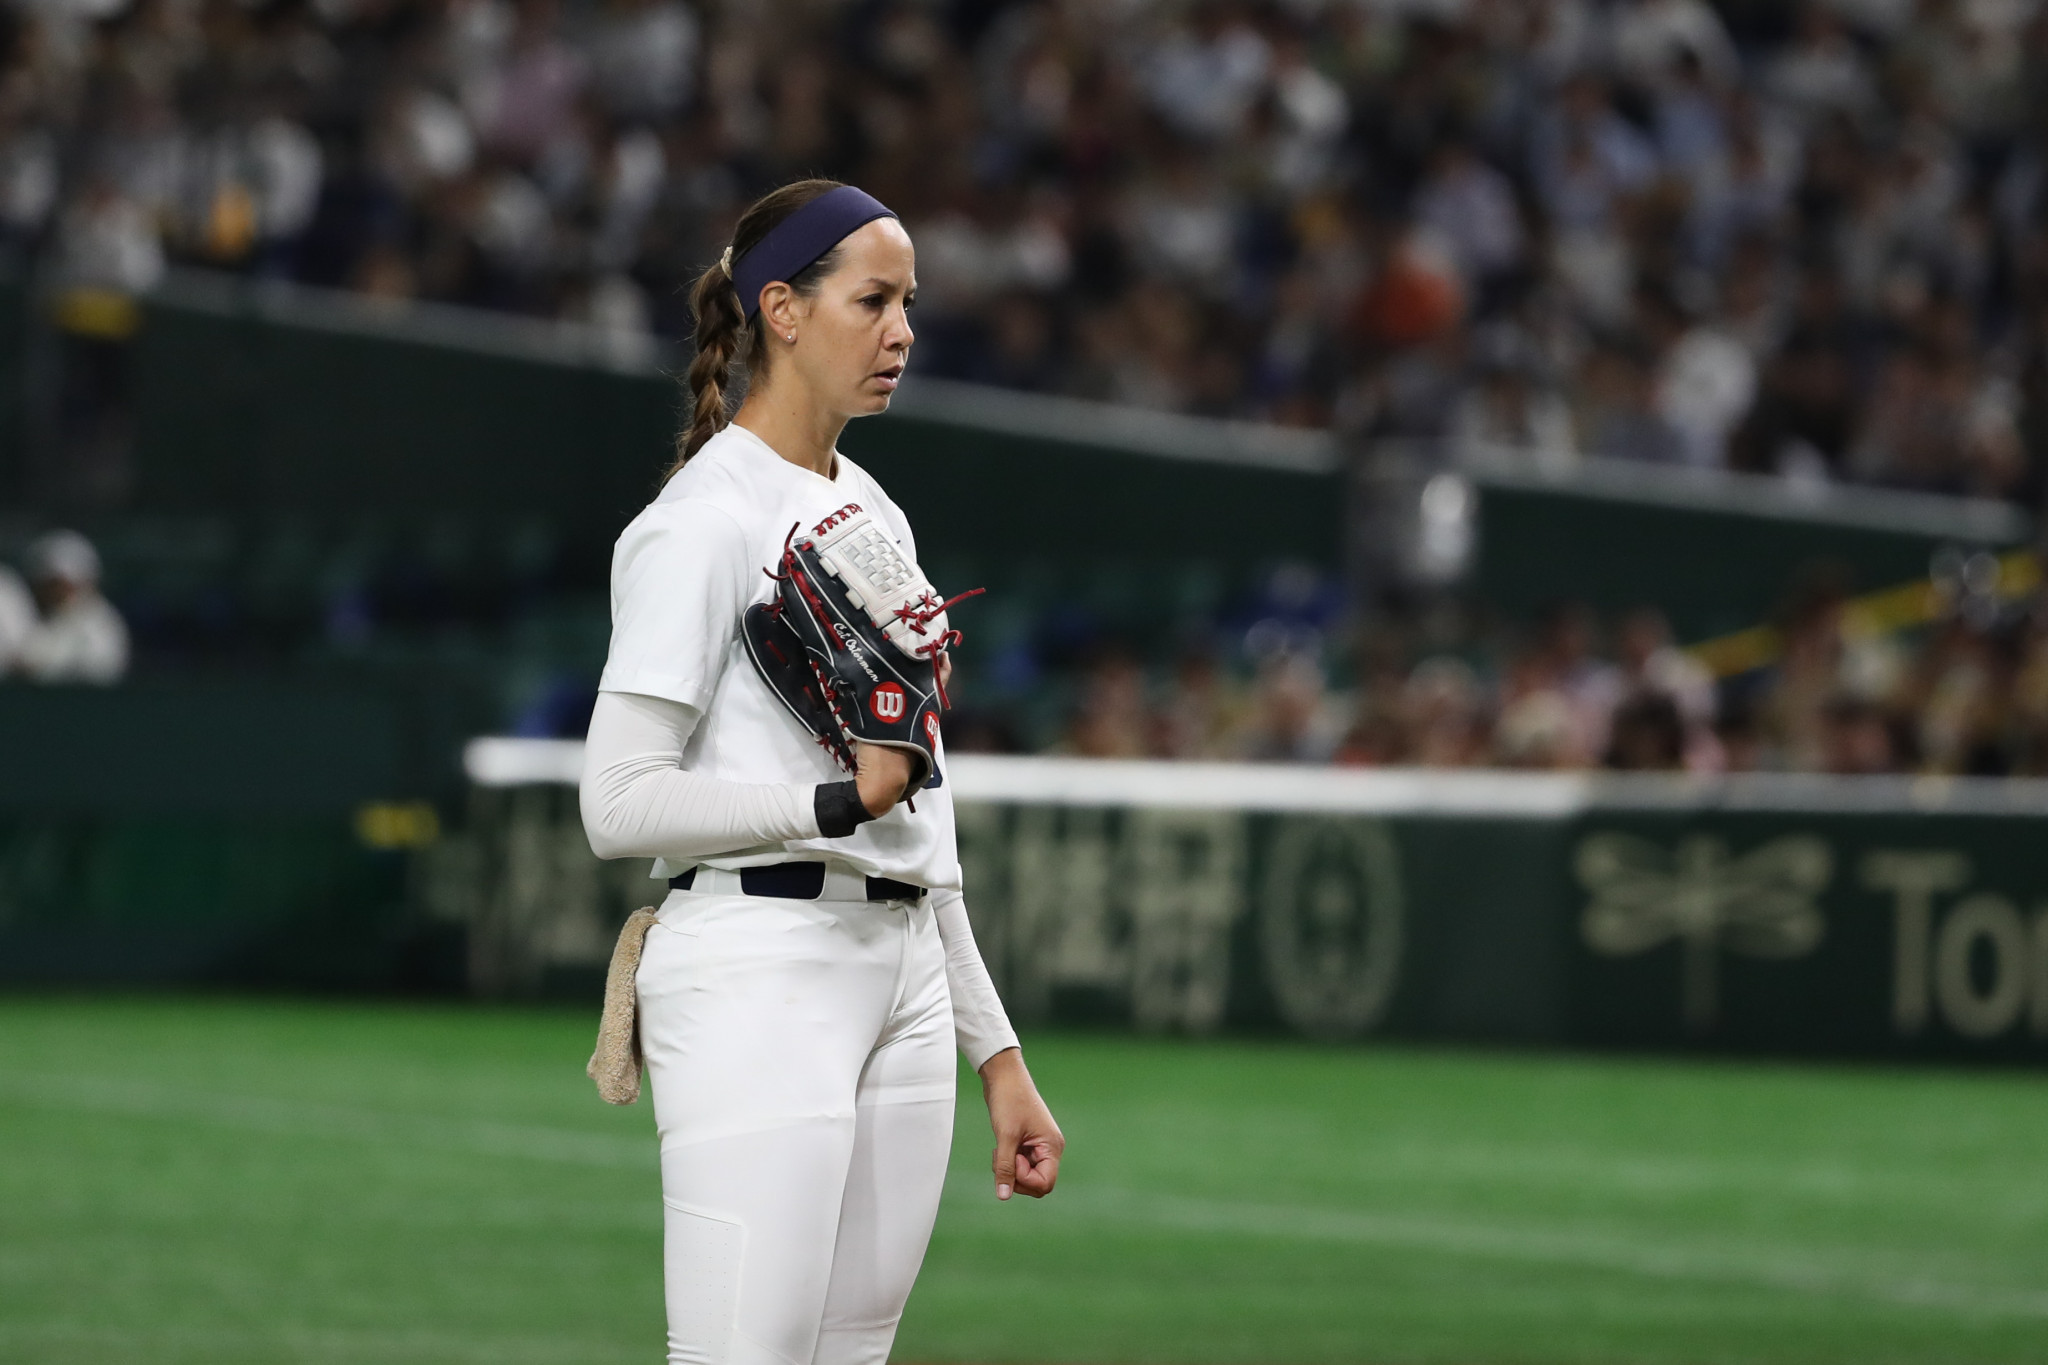 Cat Osterman will attempt to win a second Olympic gold medal at Tokyo 2020 - 17 years after her first ©Getty Images